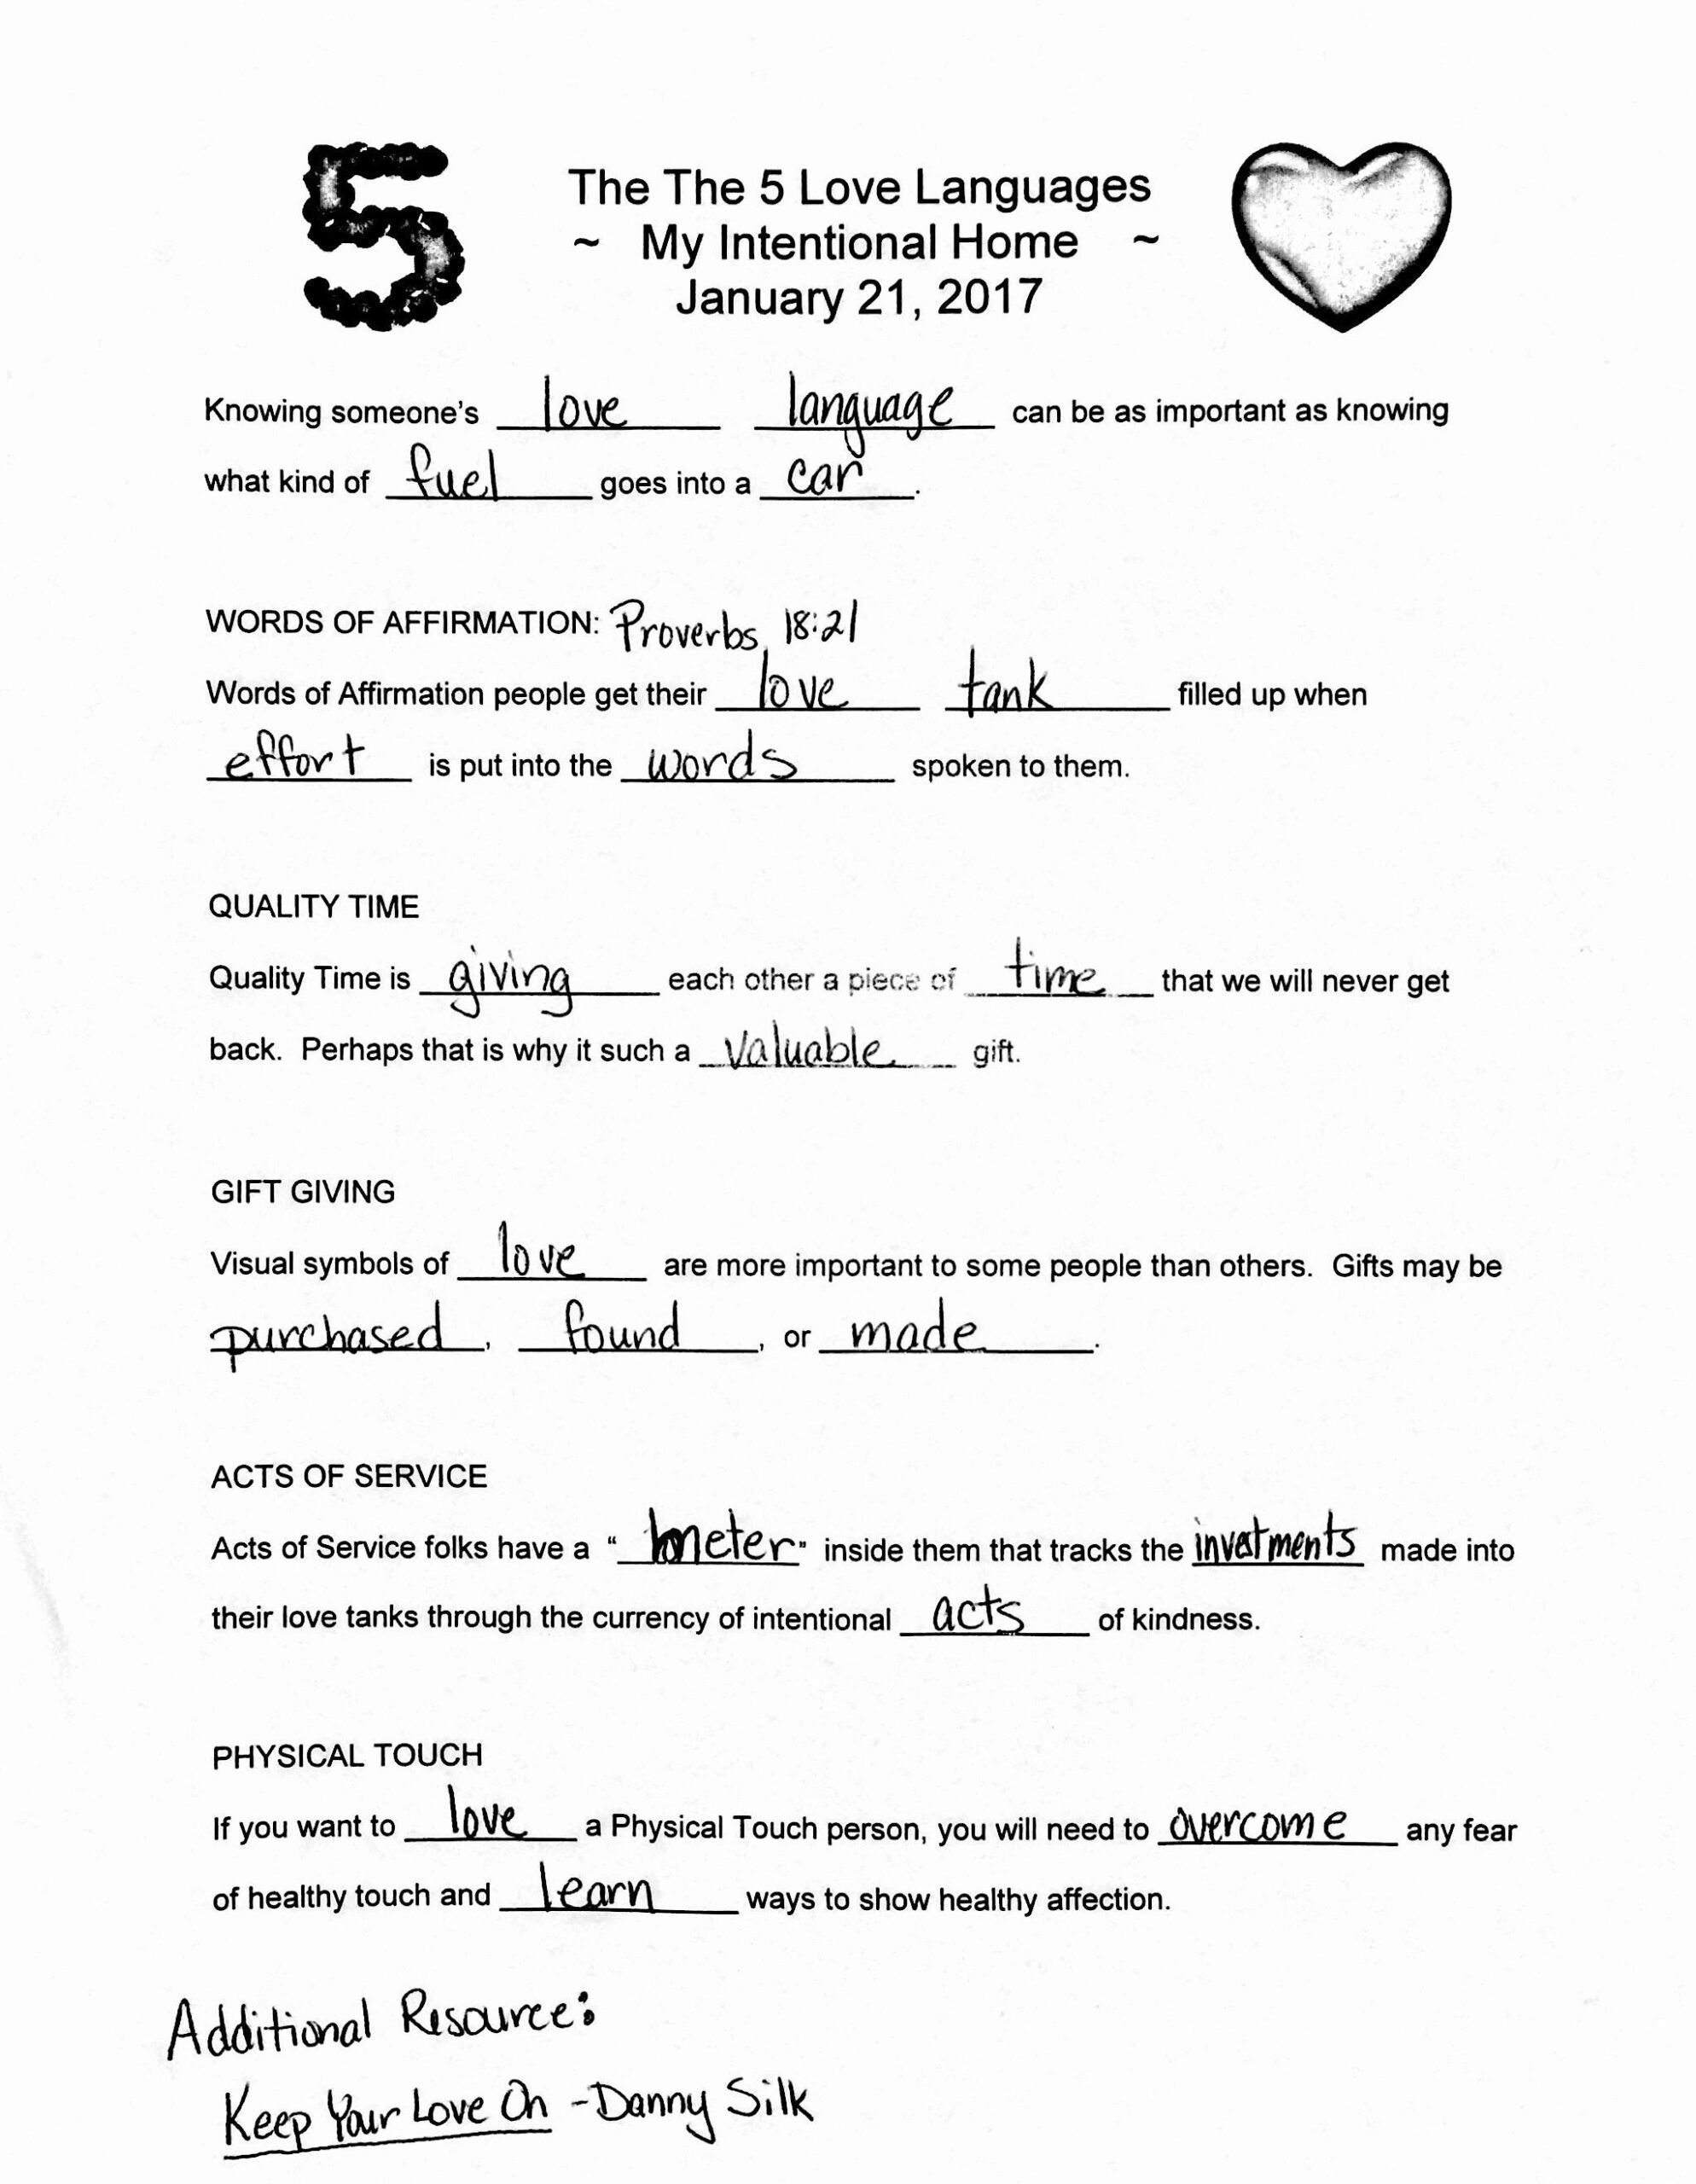 5 Love Languages Worksheet New Owatonna Mops The 5 Love Languages Oct 